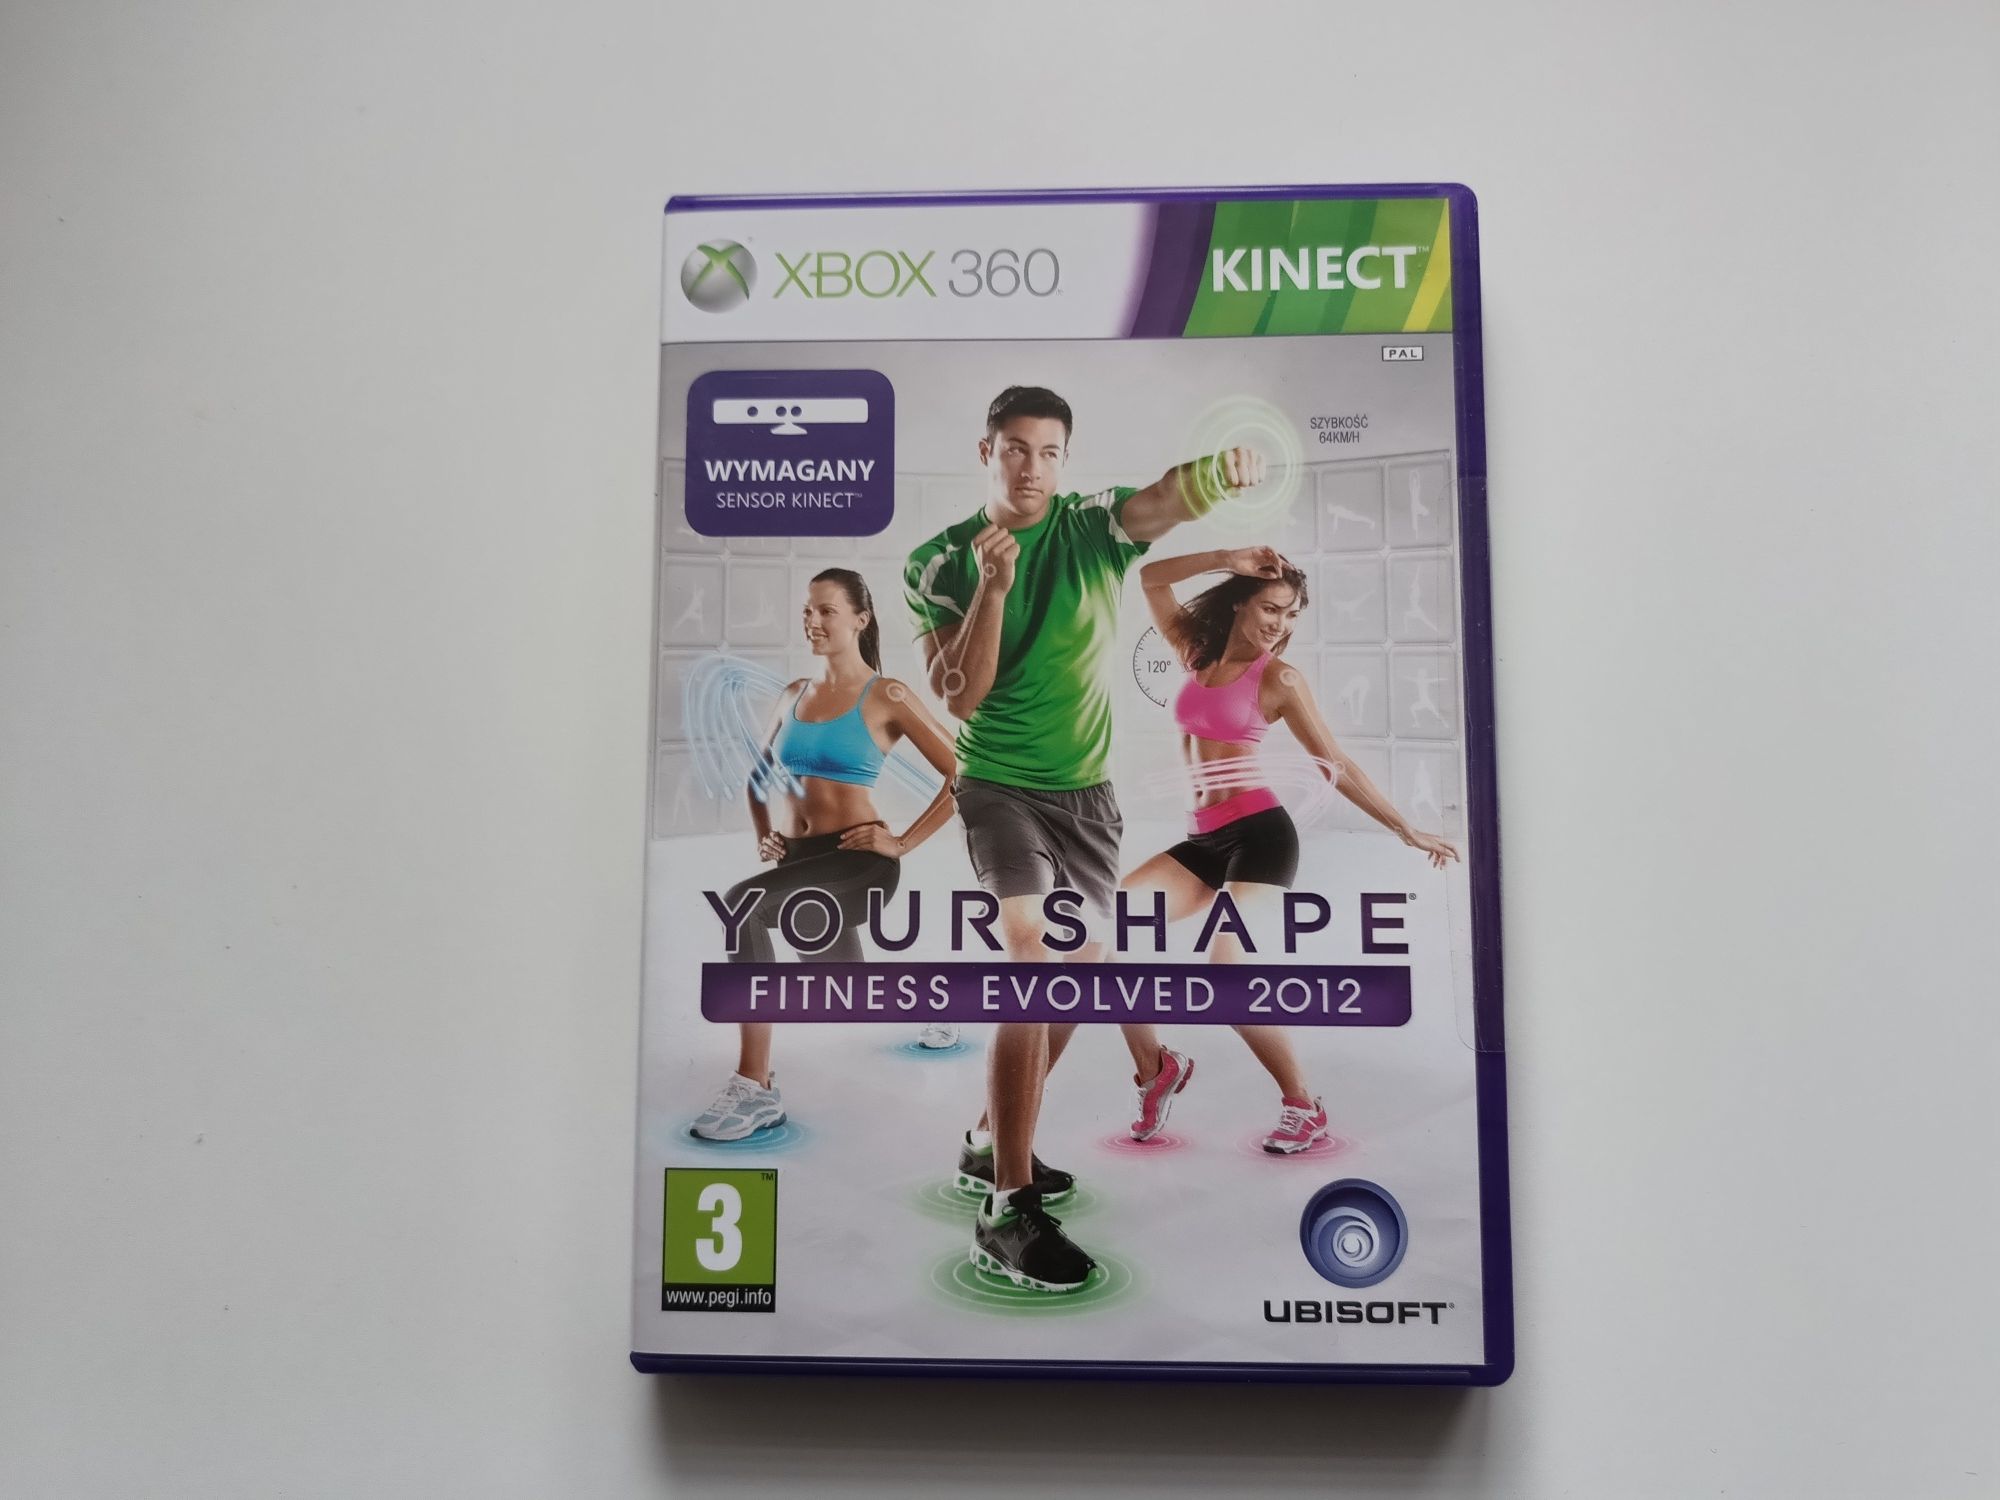 Gra Xbox 360 KINECT Your Shape 2012 Fitness Evolved